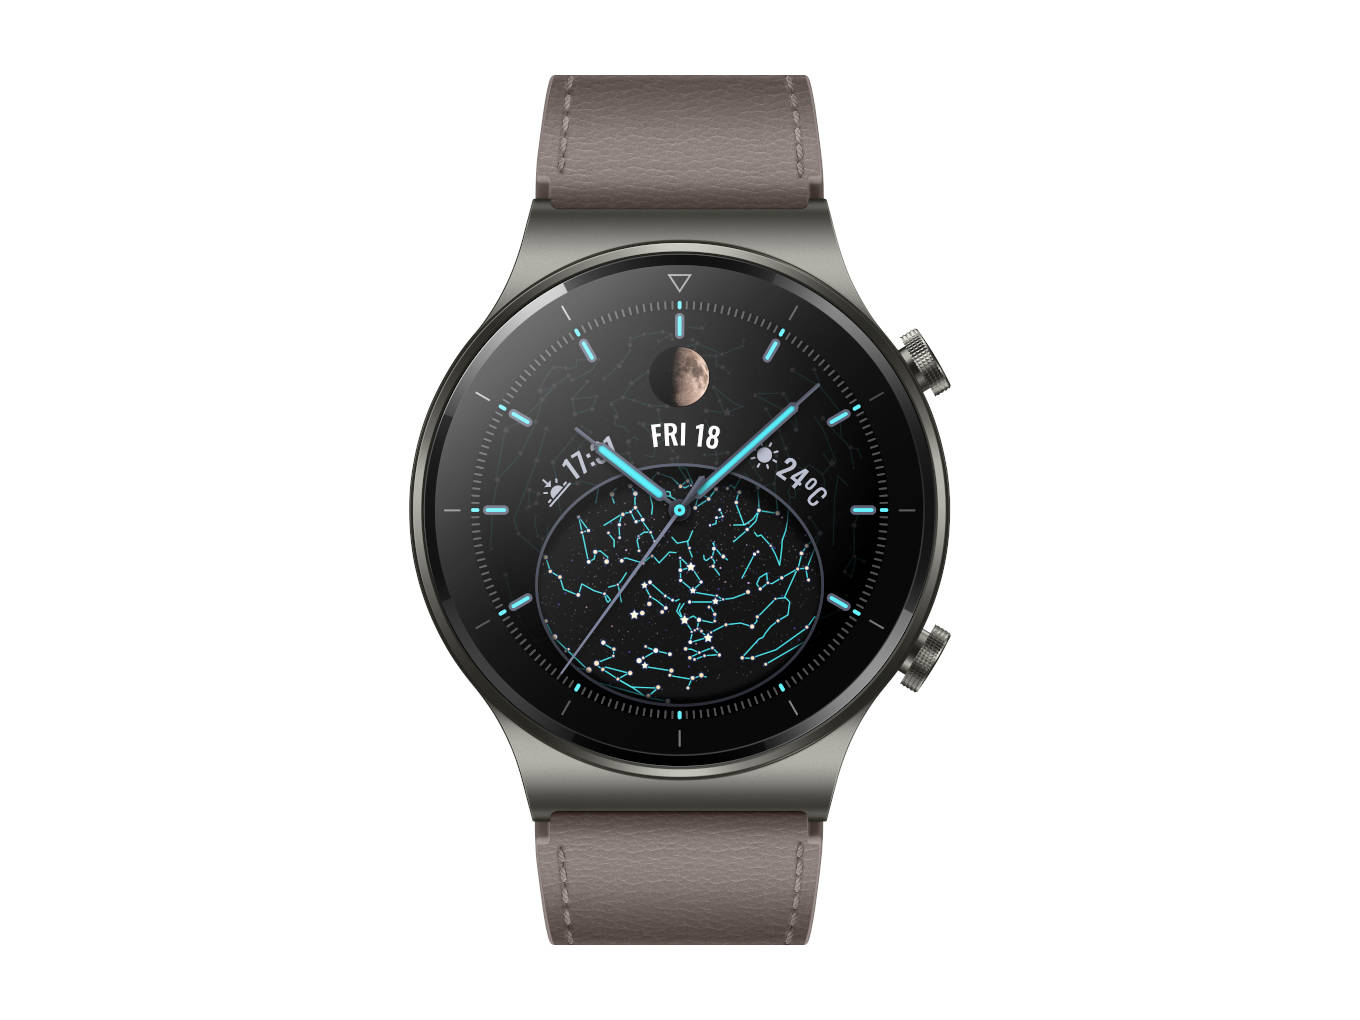 Huawei Watch GT 2 Pro - hands on with the the noble smartwatch